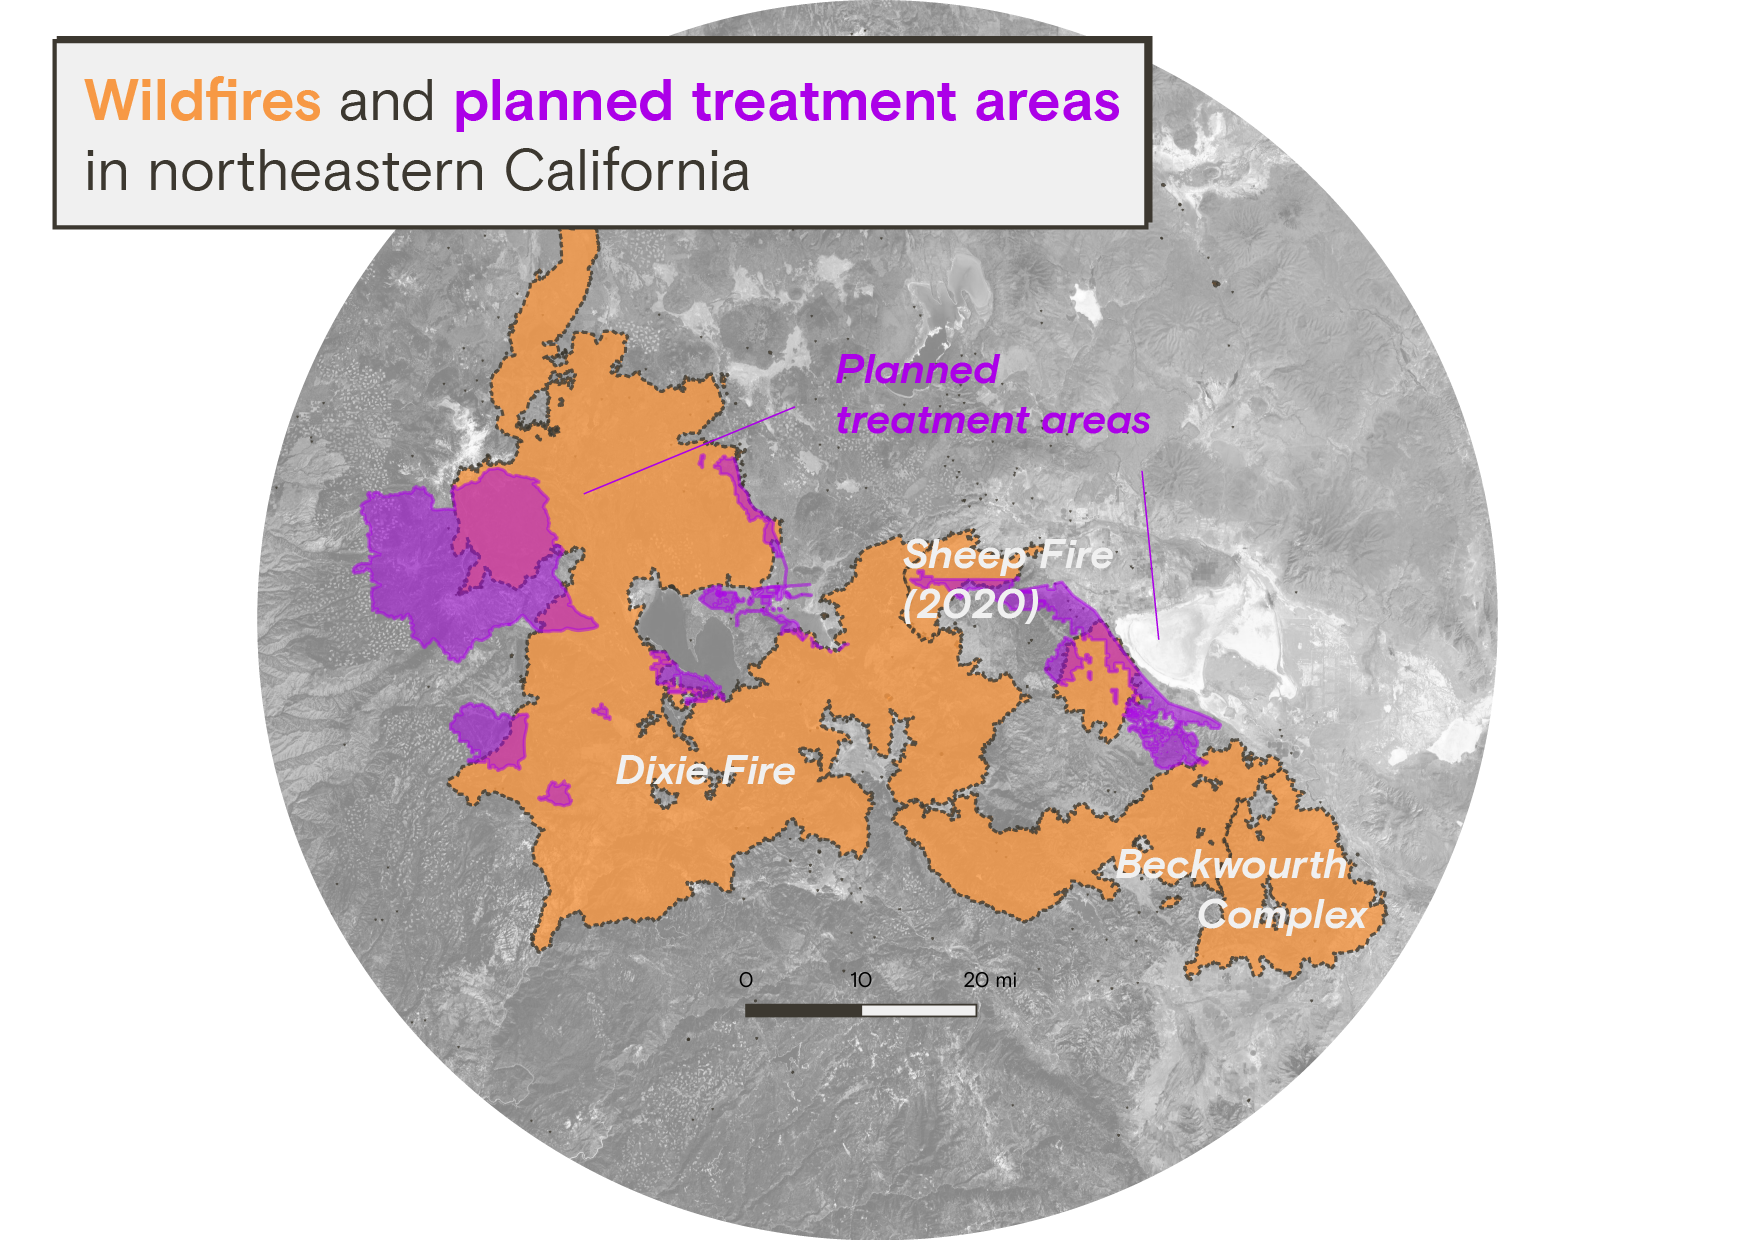 A map showing wildfires and planned treatment areas in northeastern California. The Dixie Fire, Sheep Fire, and Beckwourth Complex have infringed on many planned treatment areas before the projects could begin.